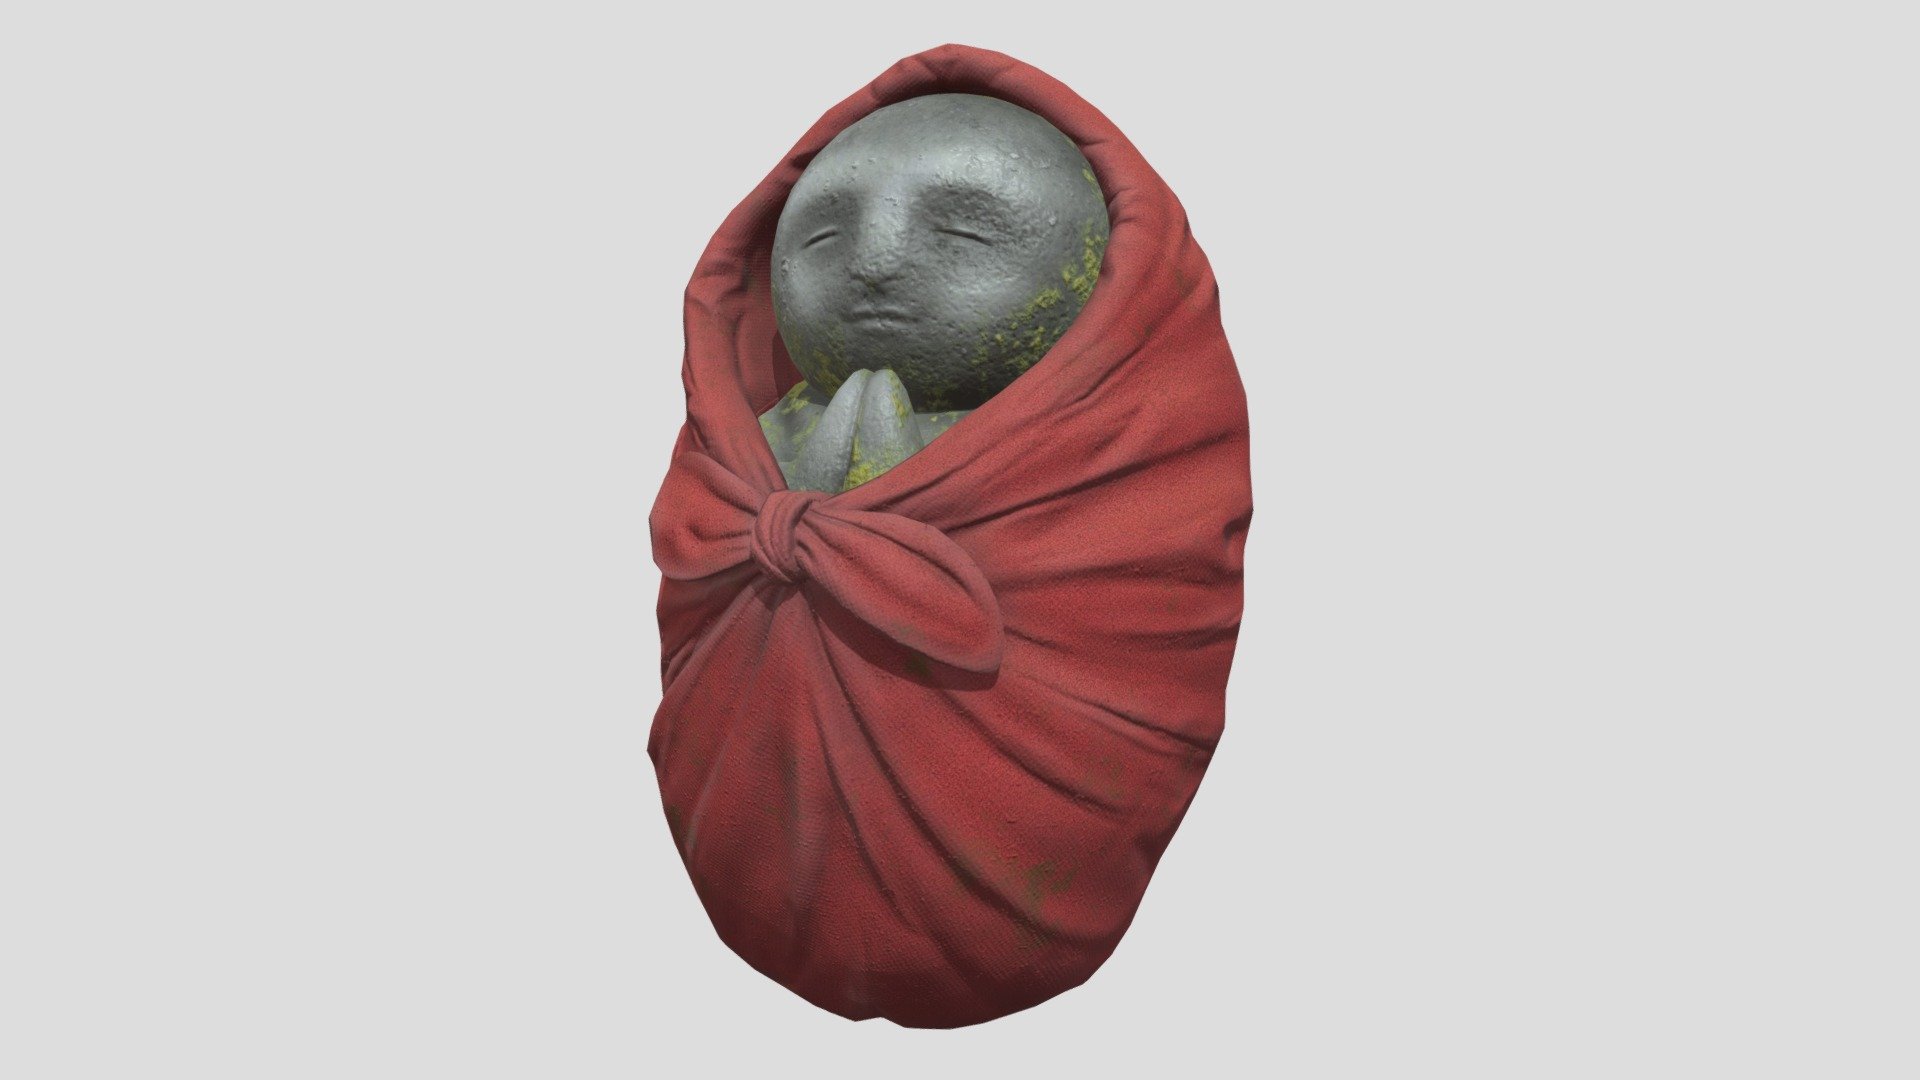 Bundled Jizo Statue
The model has an optimized low poly mesh with the greatest possible number of simplifications that do not affect photo-realism but can help to simplify it, thus lightening your scene and allowing for using this model in real-time 3d applications.

Real-world accurate model.  In this product, all objects are ERROR-FREE and All LEGAL Geometry. Subdivisions are not required for this product.

Perfect for Architectural, Product visualization, Game Engine, and VR (Virtual Reality) No Plugin Needed.

Format Type




3ds Max 2017 (standard shader)

FBX

OBJ

3DS

Texture

1 material used. 1 different sets of textures:




Diffuse

Normal

Specular

Gloss

Specular n Gloss [.tga additional texture]

You might need to re-assign textures map to model in your relevant software - Bundled Jizo Statue - Buy Royalty Free 3D model by luxe3dworld 3d model